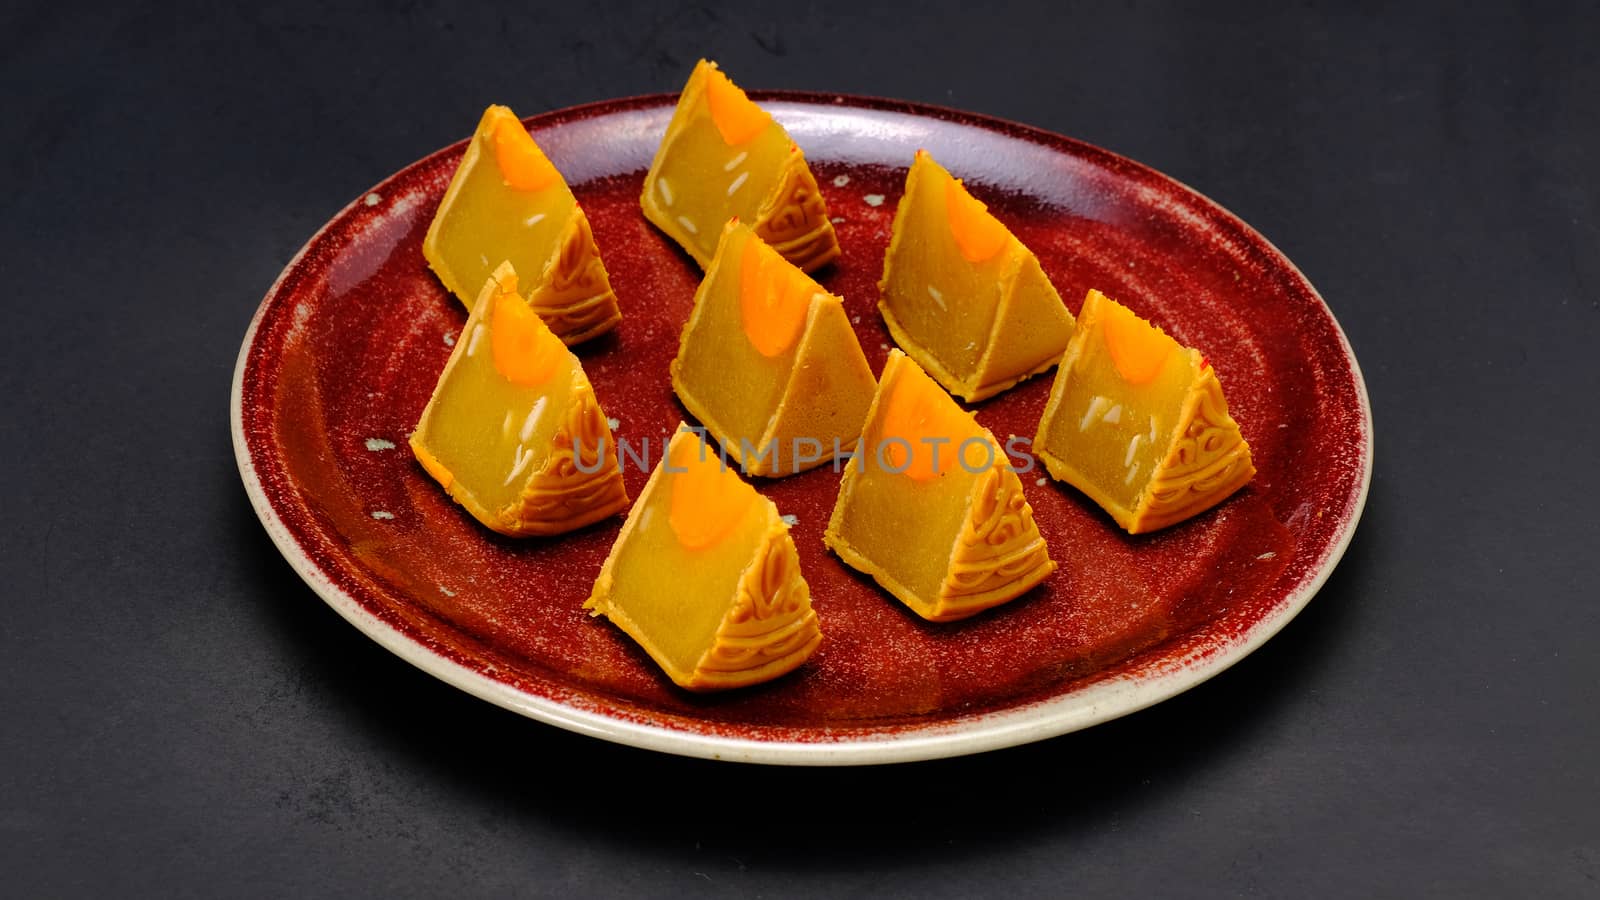 moon-cake, a traditional chinese pastry, eaten during the harvest moon festival in october, is composed of durian, sweet bean and almond slices fillings, with preserved duck york in the center, is placed on a red cceramic plate